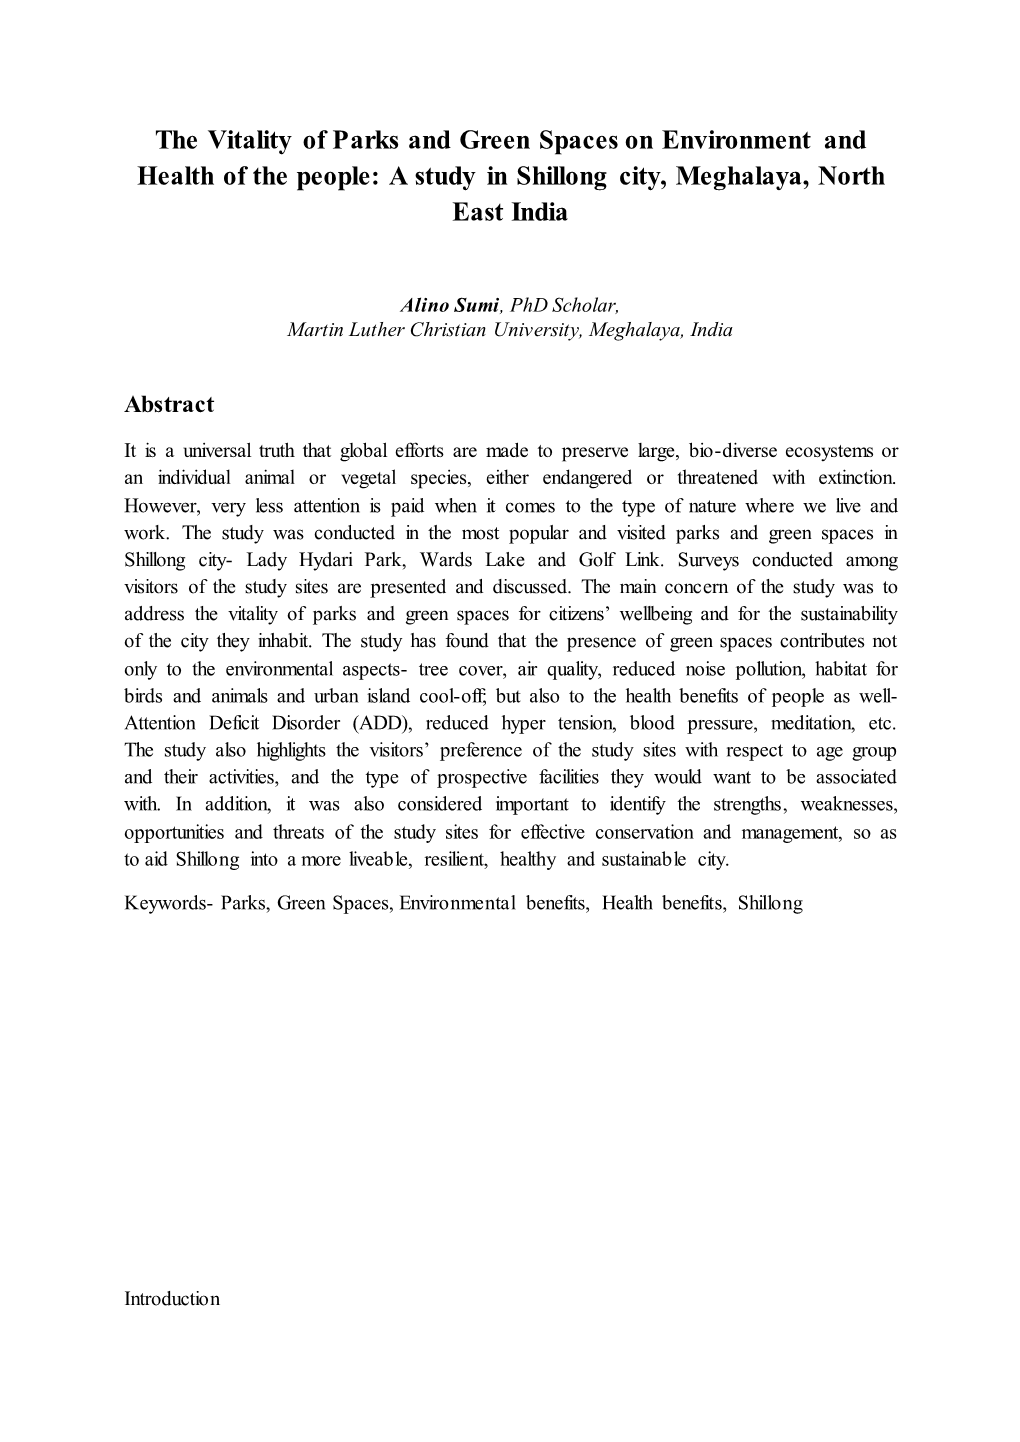 The Vitality of Parks and Green Spaces on Environment and Health of the People: a Study in Shillong City, Meghalaya, North East India